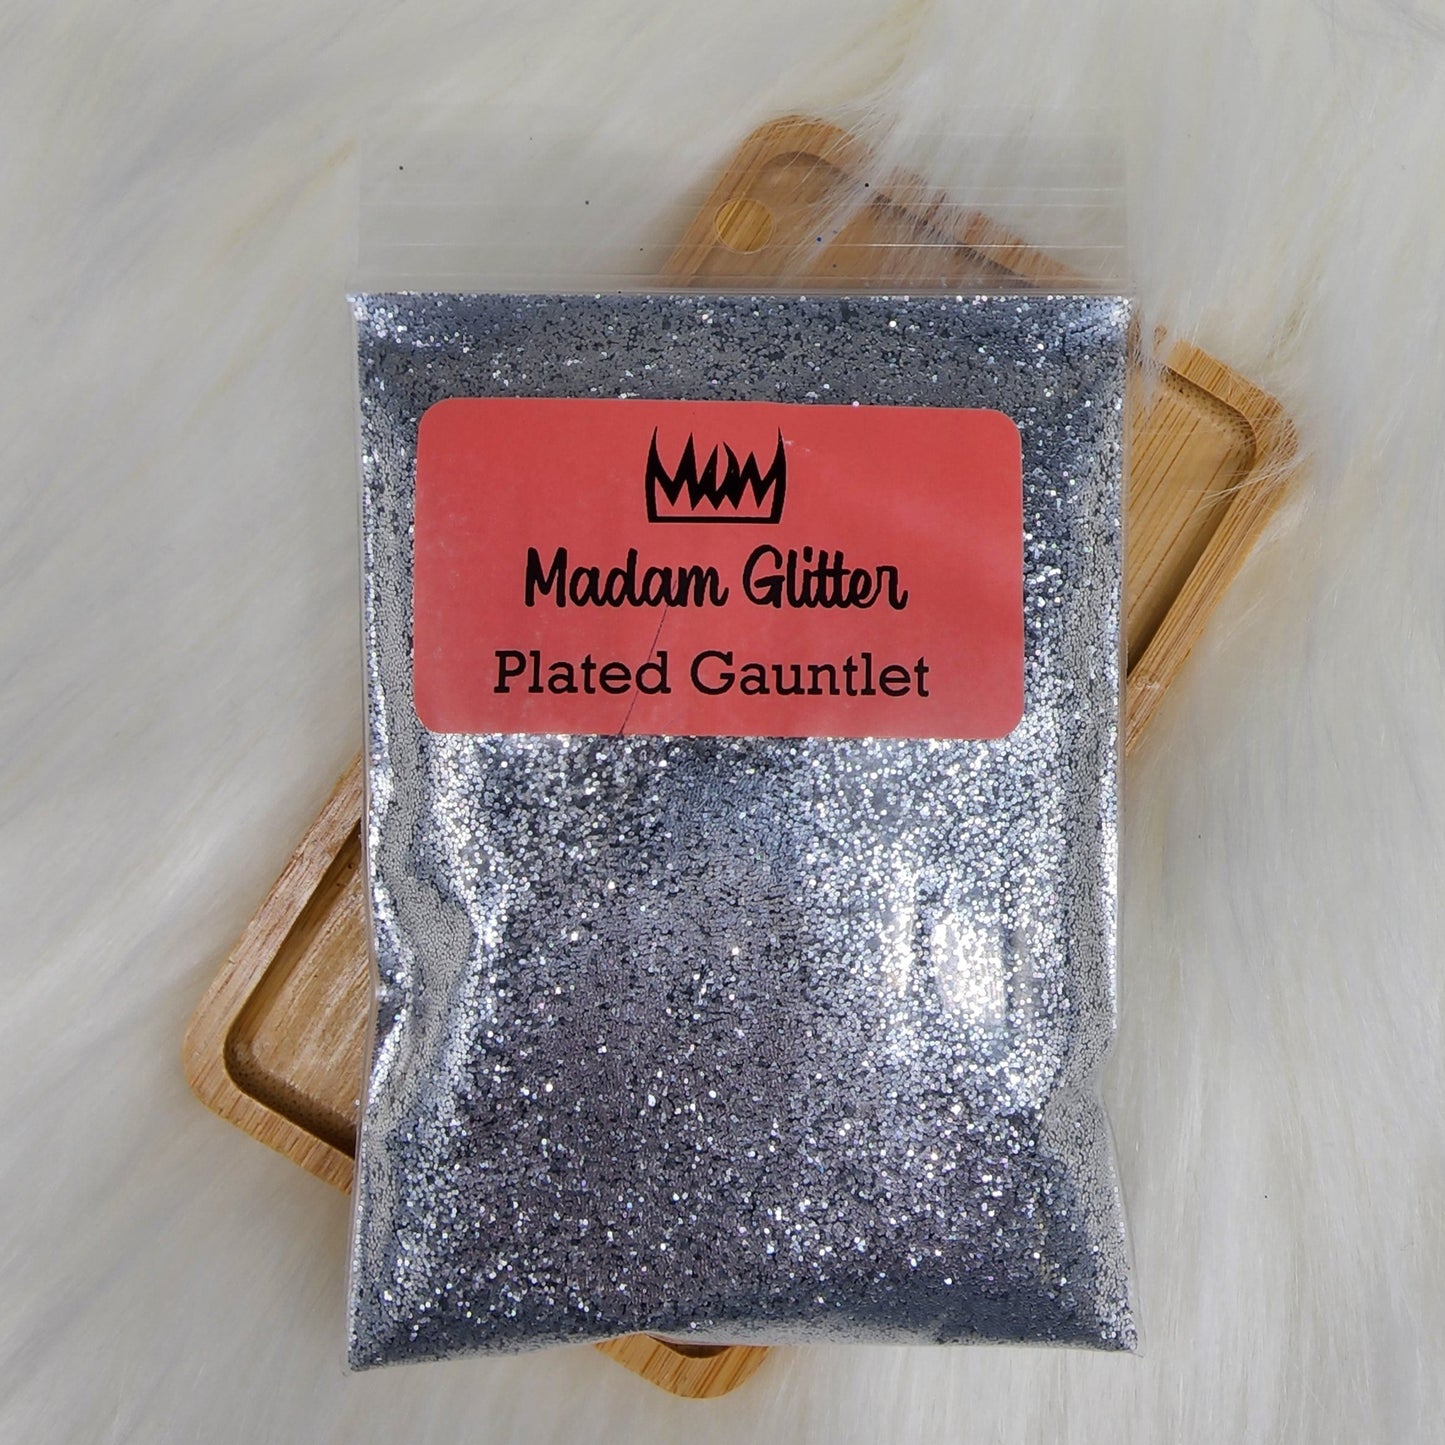 Plated Gauntlet -MG